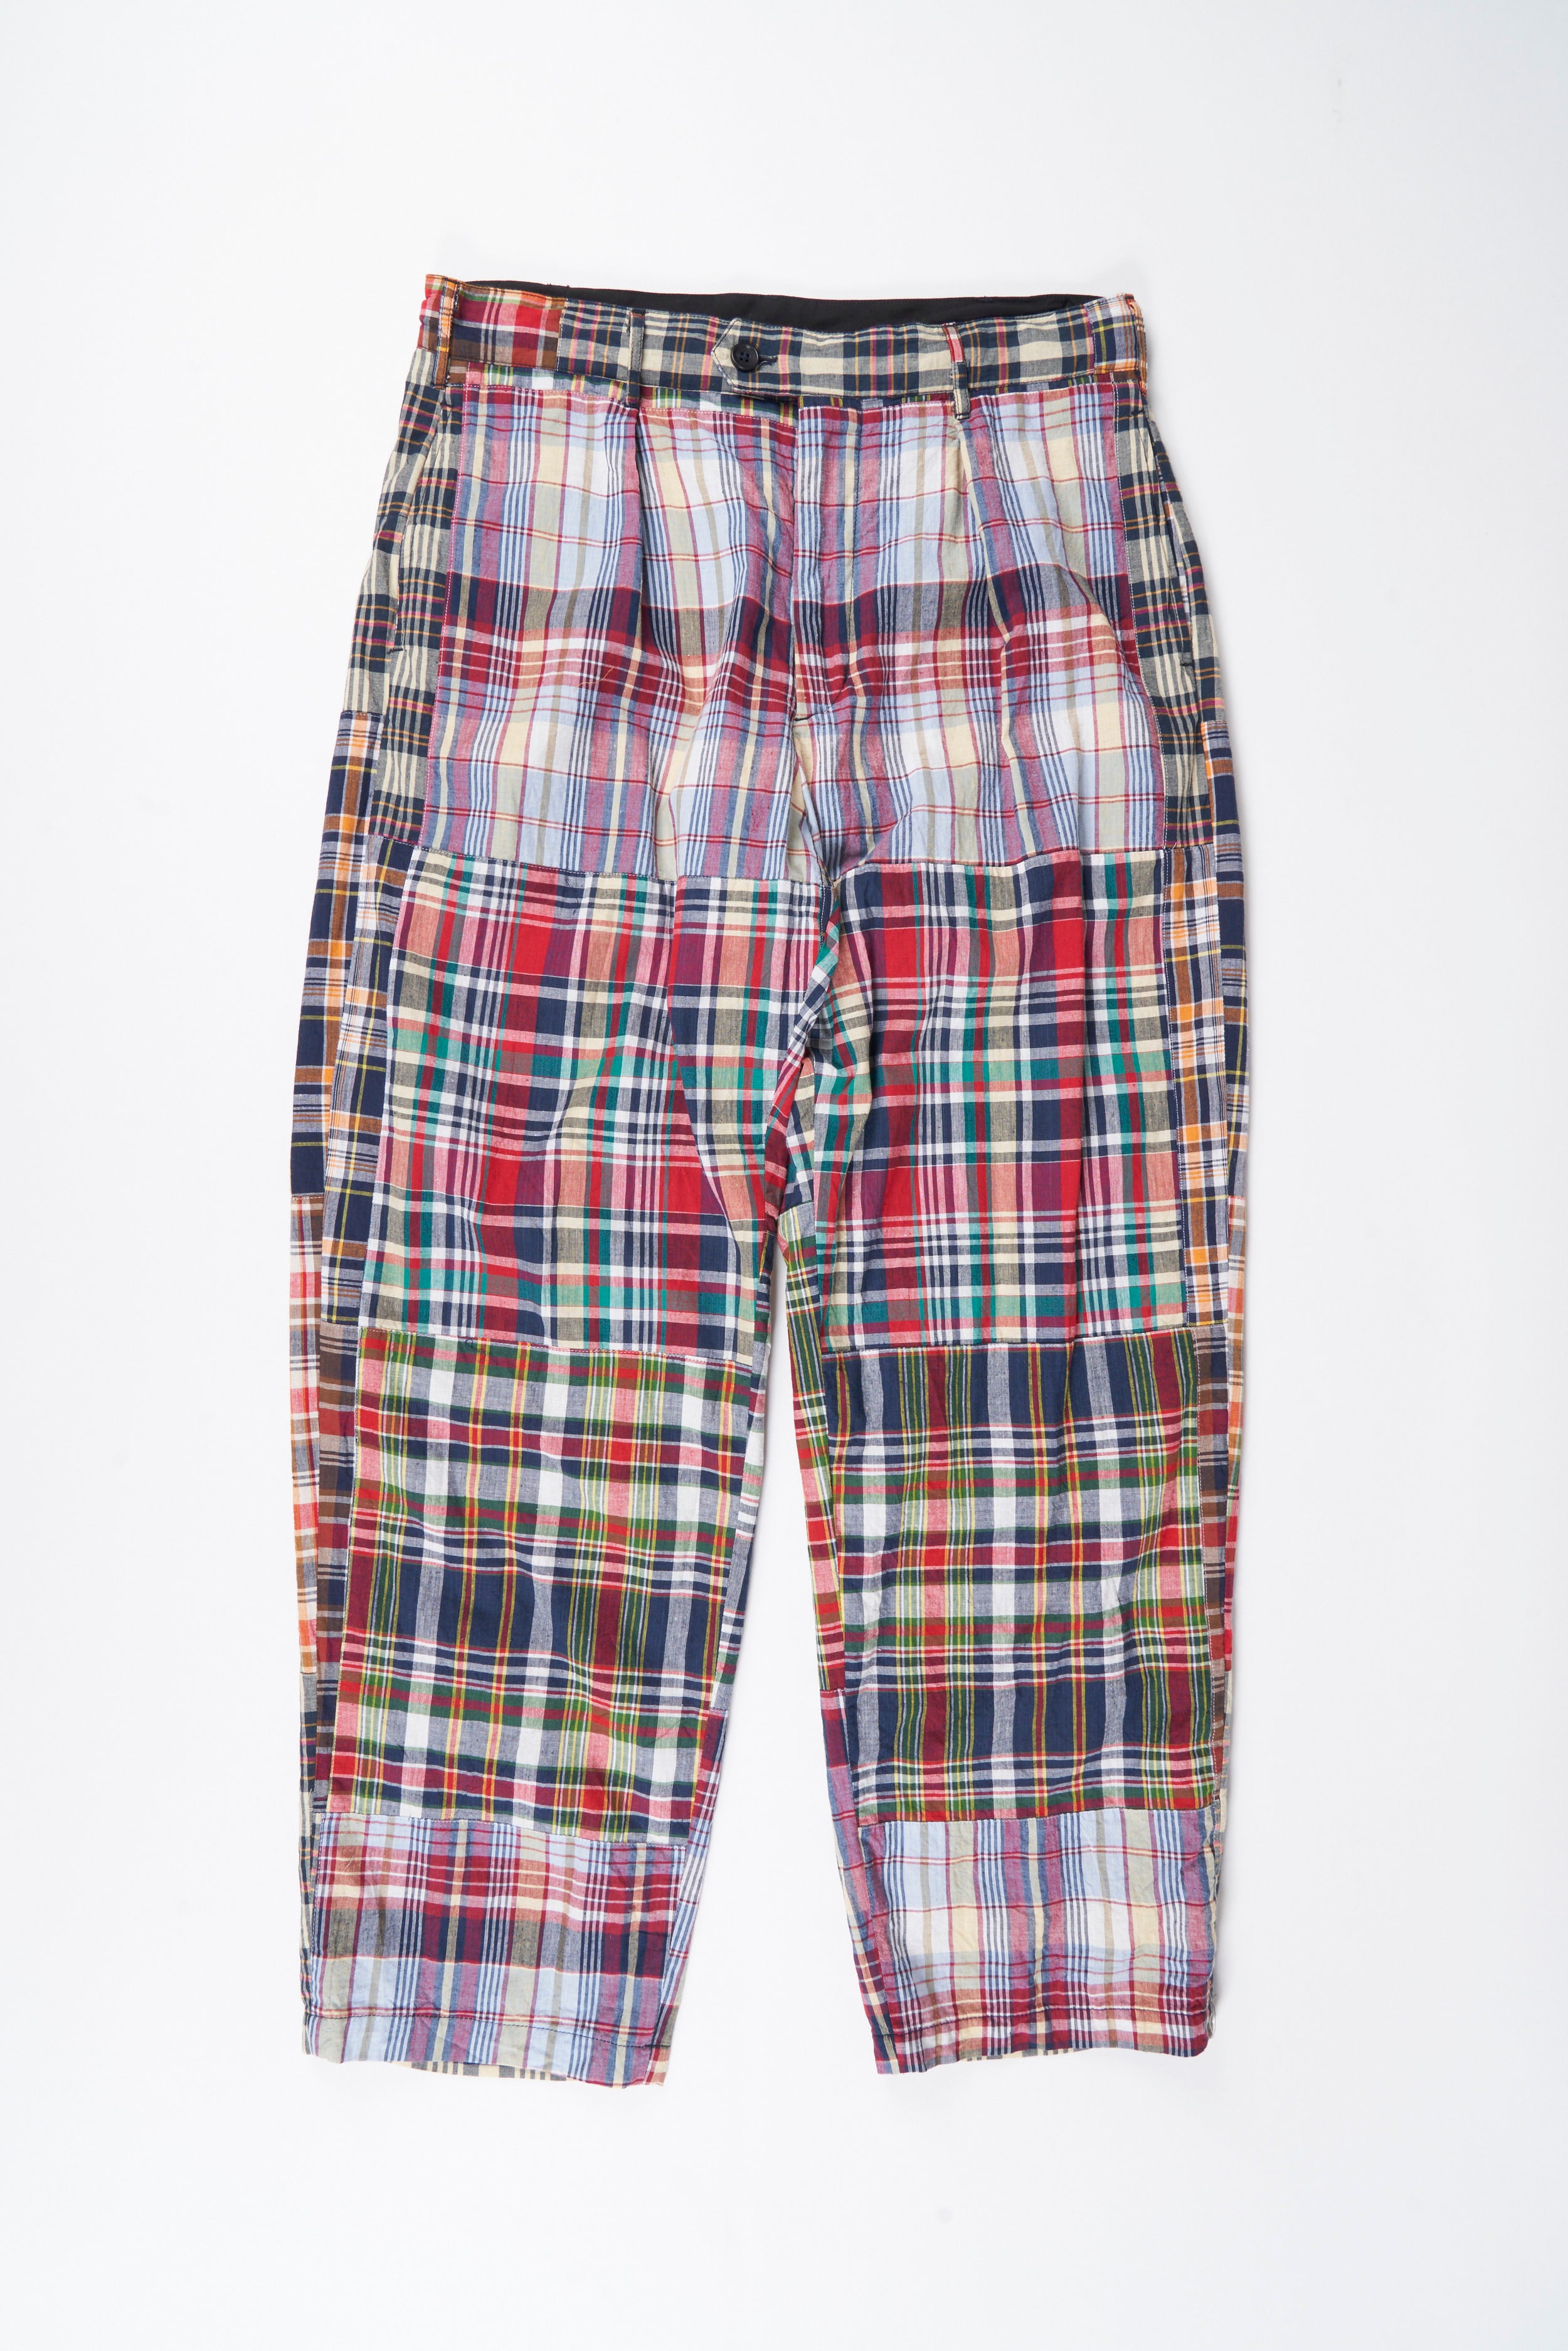 Carlyle Pant - Navy Square Patchwork Madras